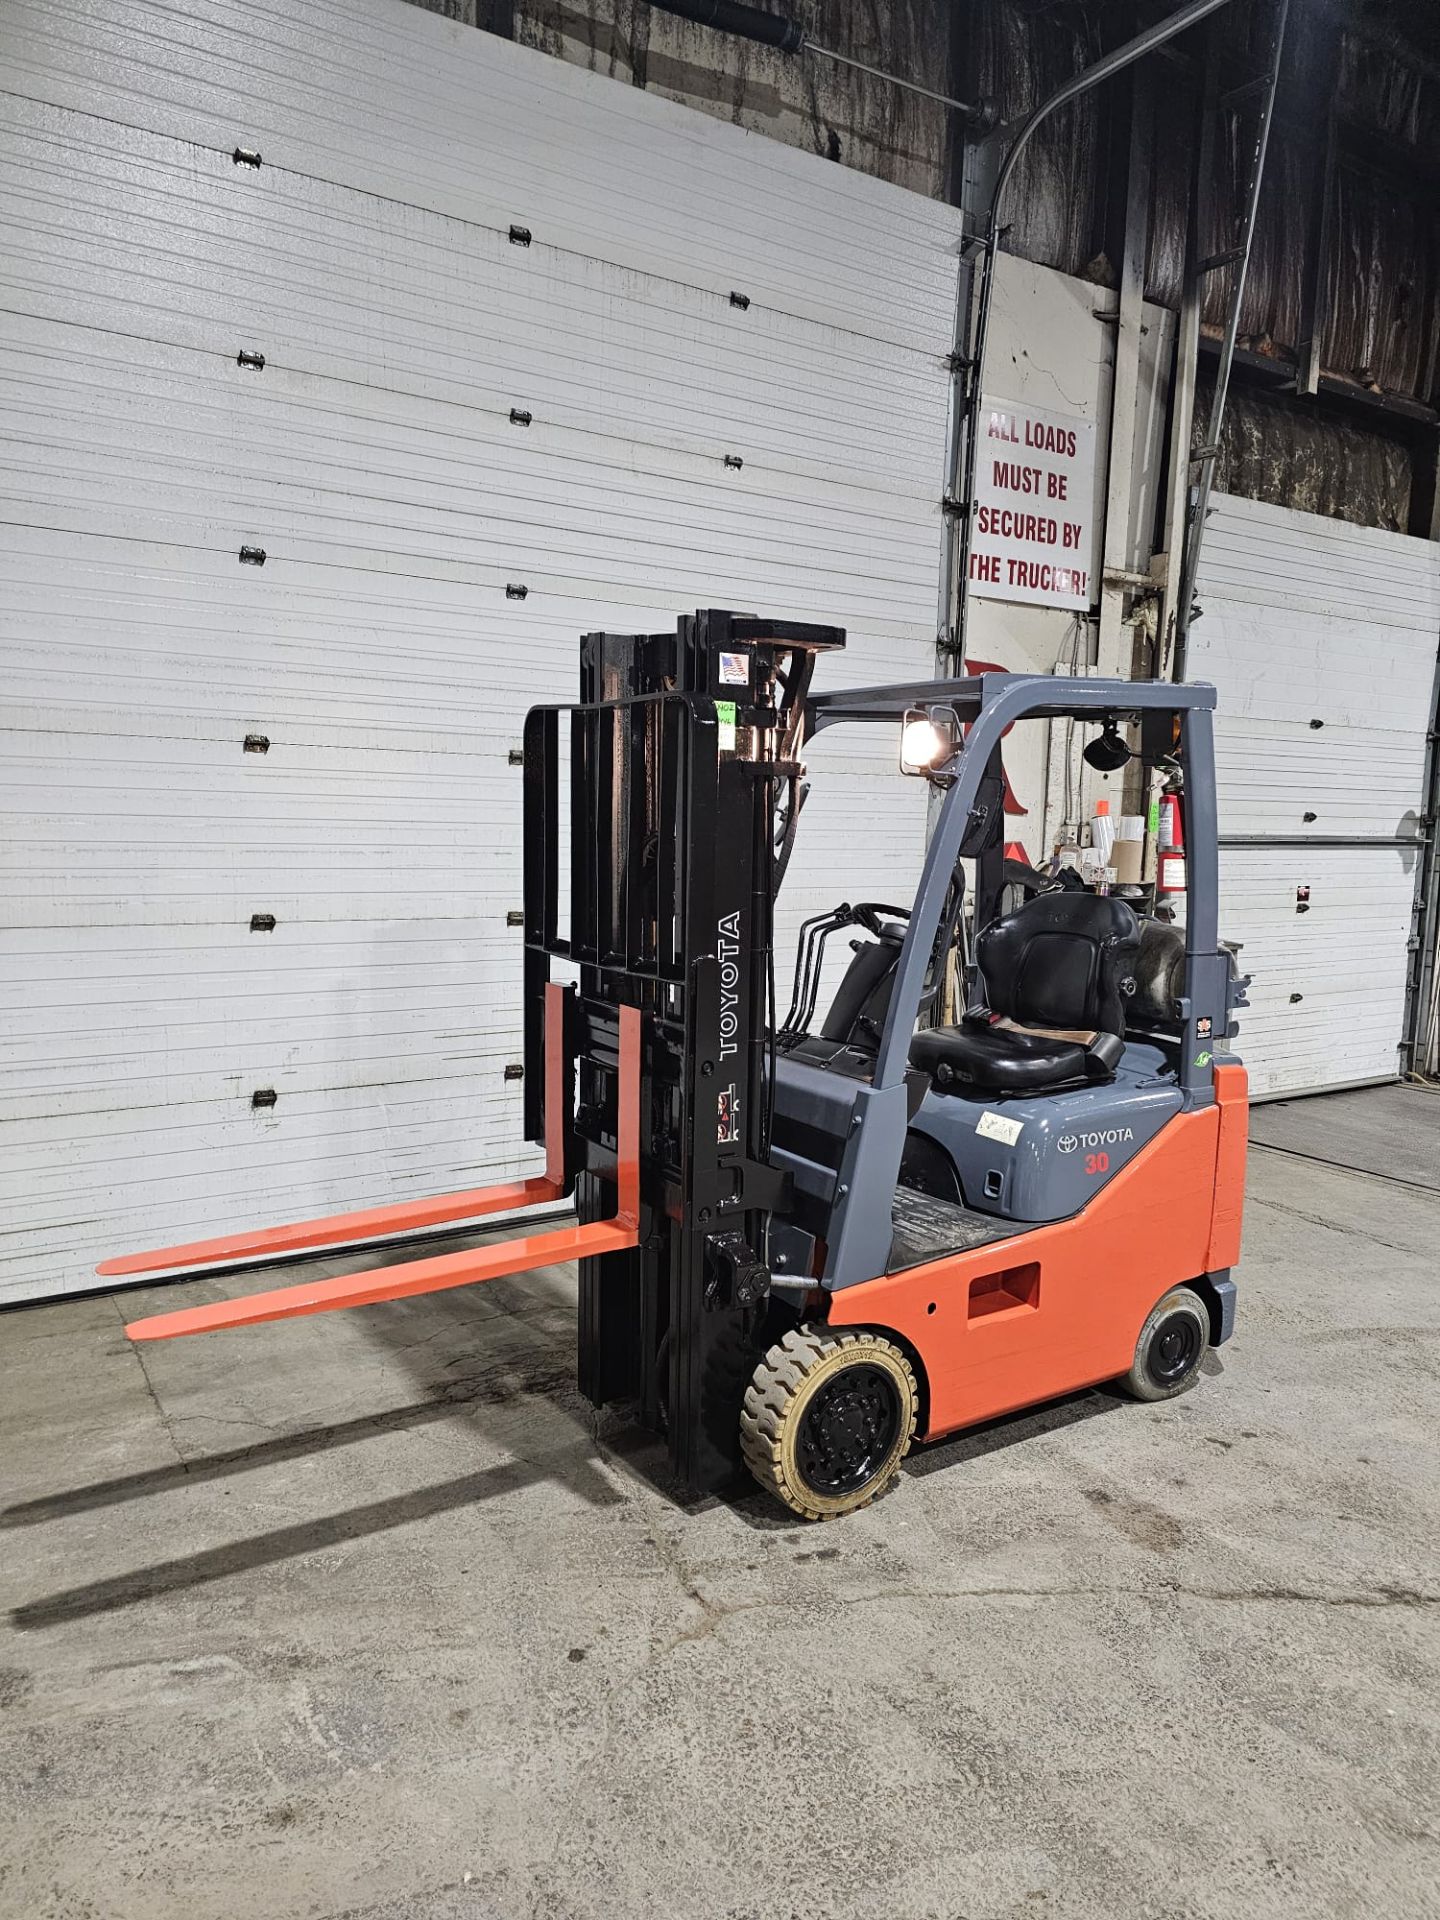 2016 TOYOTA 3,000lbs Capacity LPG (Propane) Forklift with sideshift and 3-STAGE MAST & Non marking - Image 3 of 7